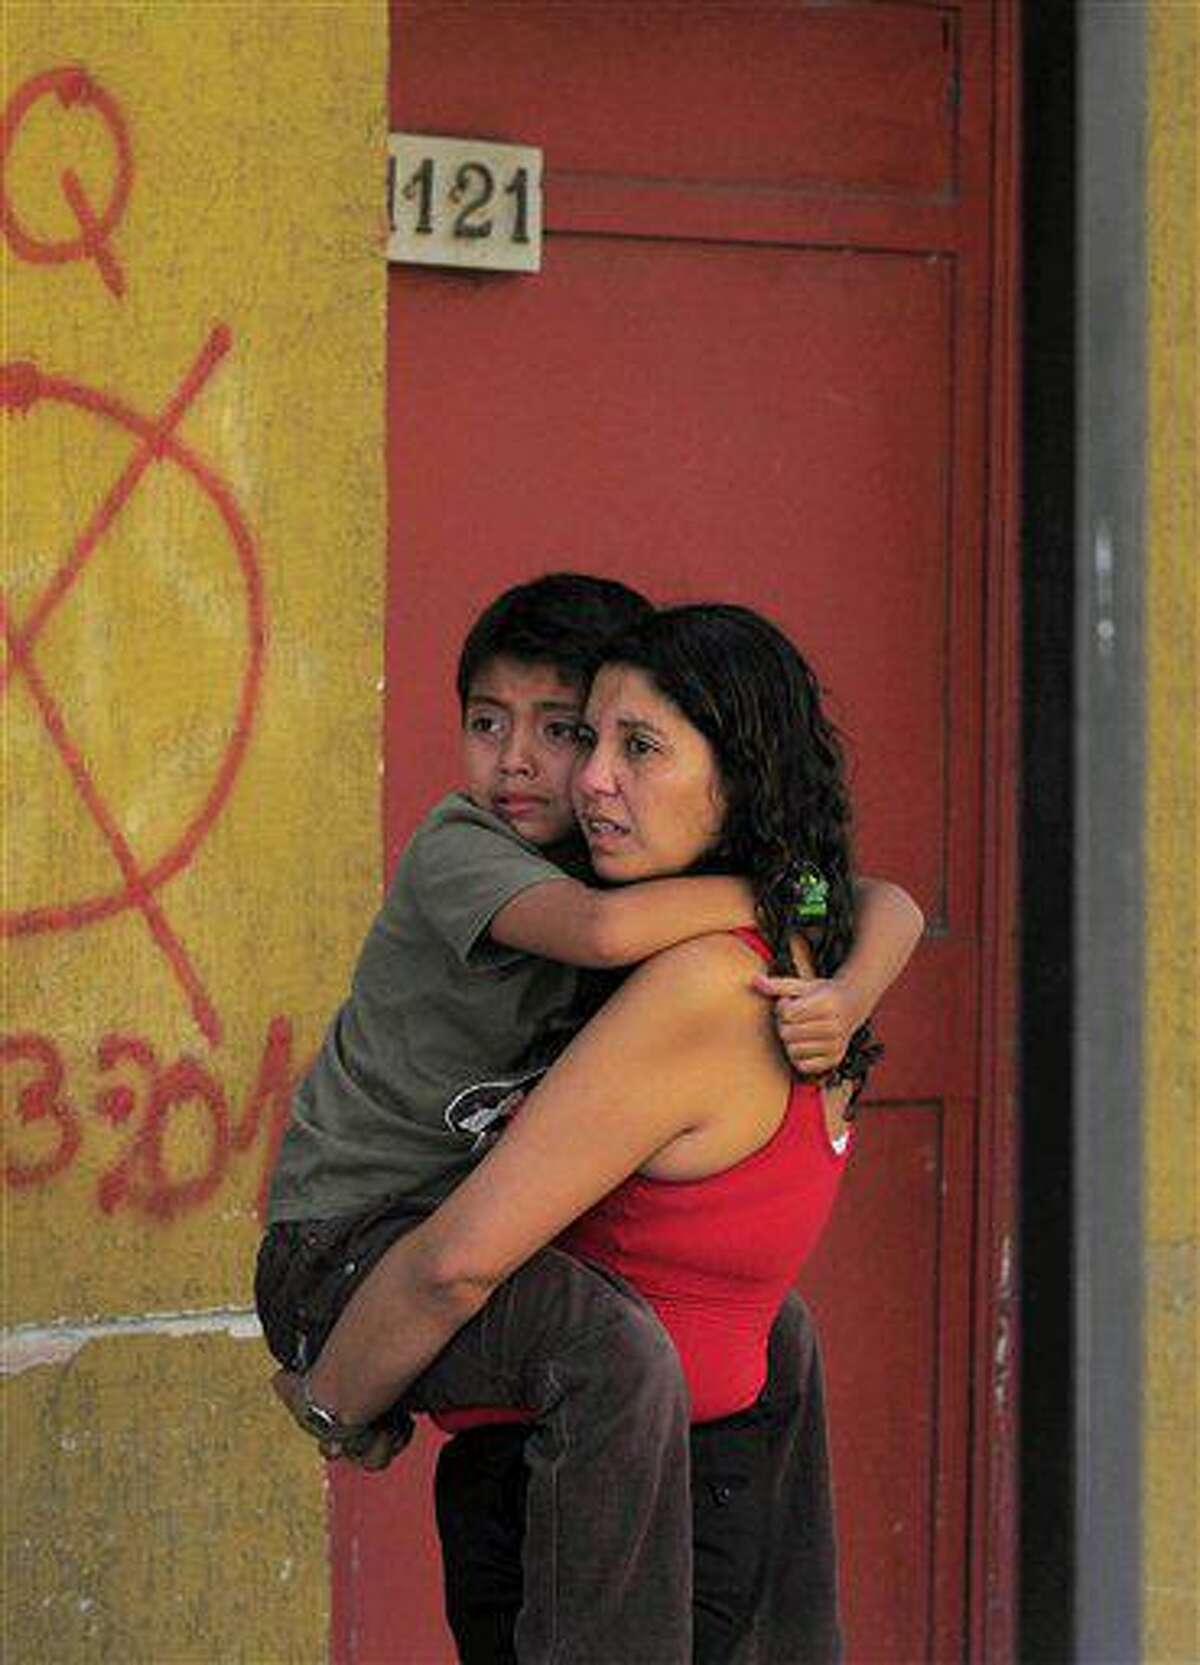 A woman holds a child as they stand outside a building as a precaution after a magnitude-6.8 earthquake in Concepcion, Chile, Friday Feb. 11, 2011. The earthquake struck central Chile Friday, centered in almost exactly the same spot where last year's magnitude-8.8 quake spawned a tsunami and devastated coastal communities. Electricity and phone service were disrupted and thousands of people fled to higher ground following Friday's quake, but the government quickly announced that there was no risk of a tsunami, and there were no reports of damage or injuries. (AP Photo/Francisco Negroni)